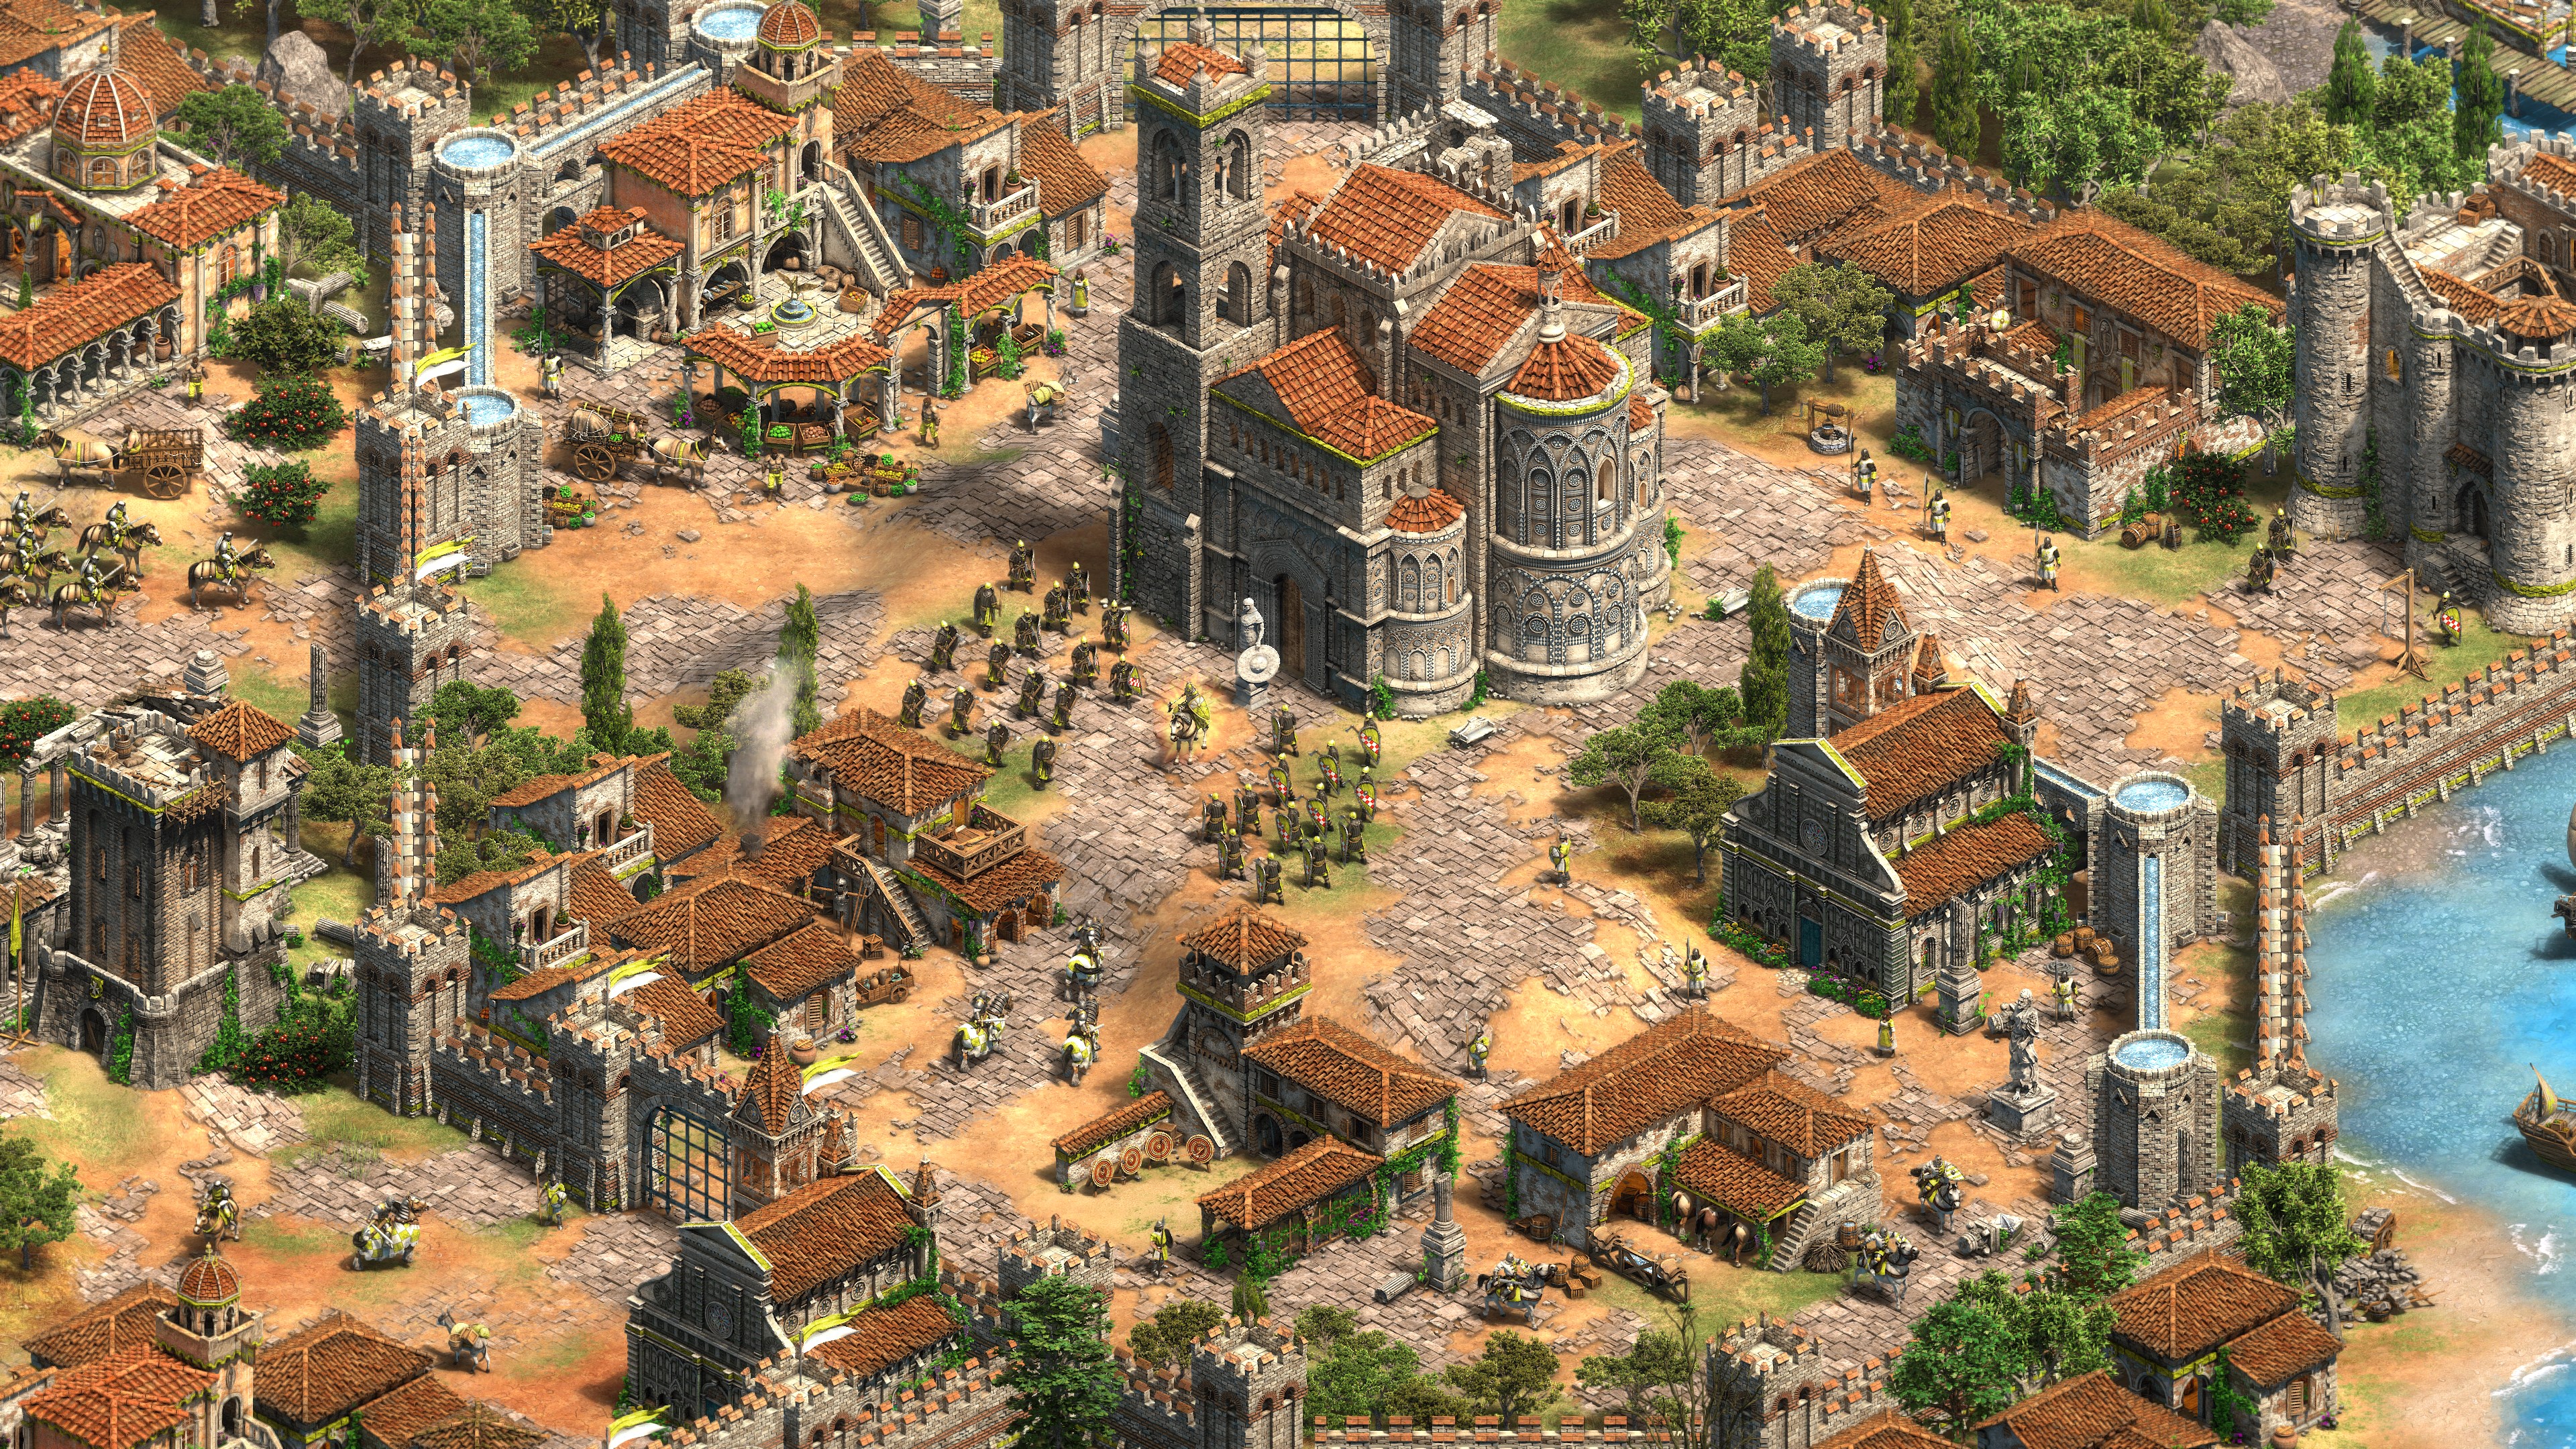 Age of Empires II: Definitive Edition - Lords of the West screenshot 52465